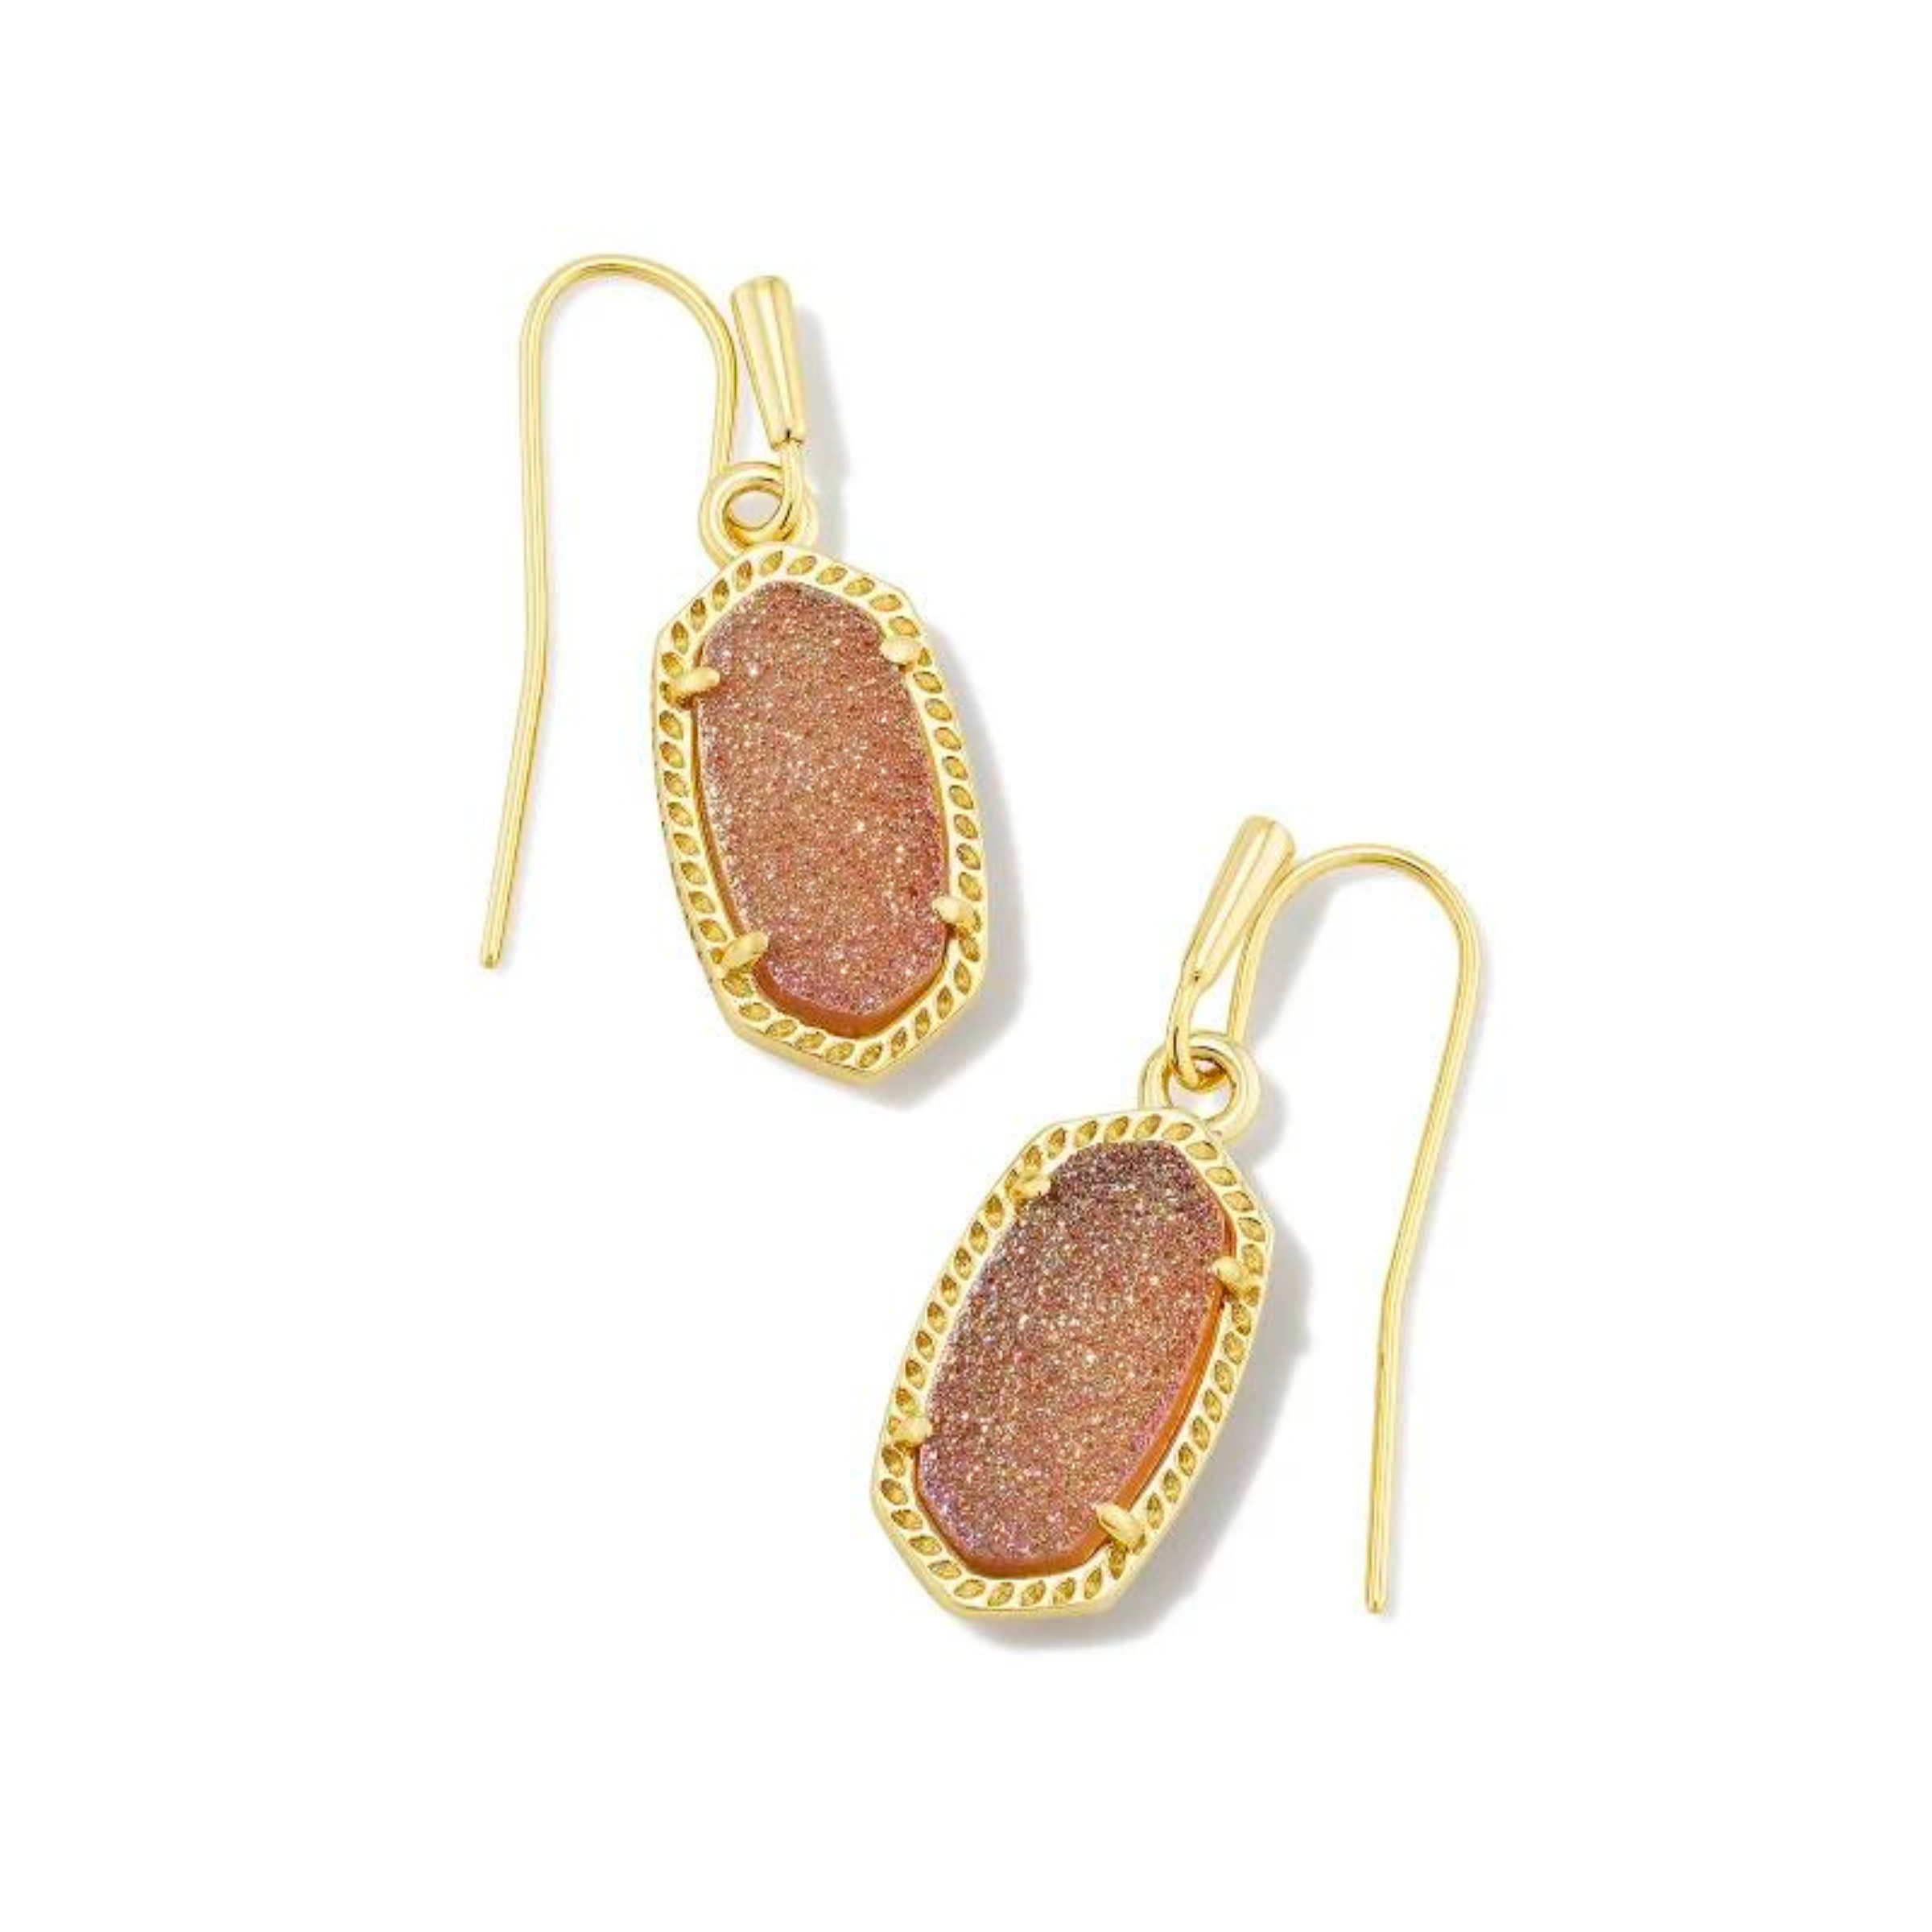 Kendra Scott | Lee Gold Drop Earrings in Spice Drusy - Giddy Up Glamour Boutique